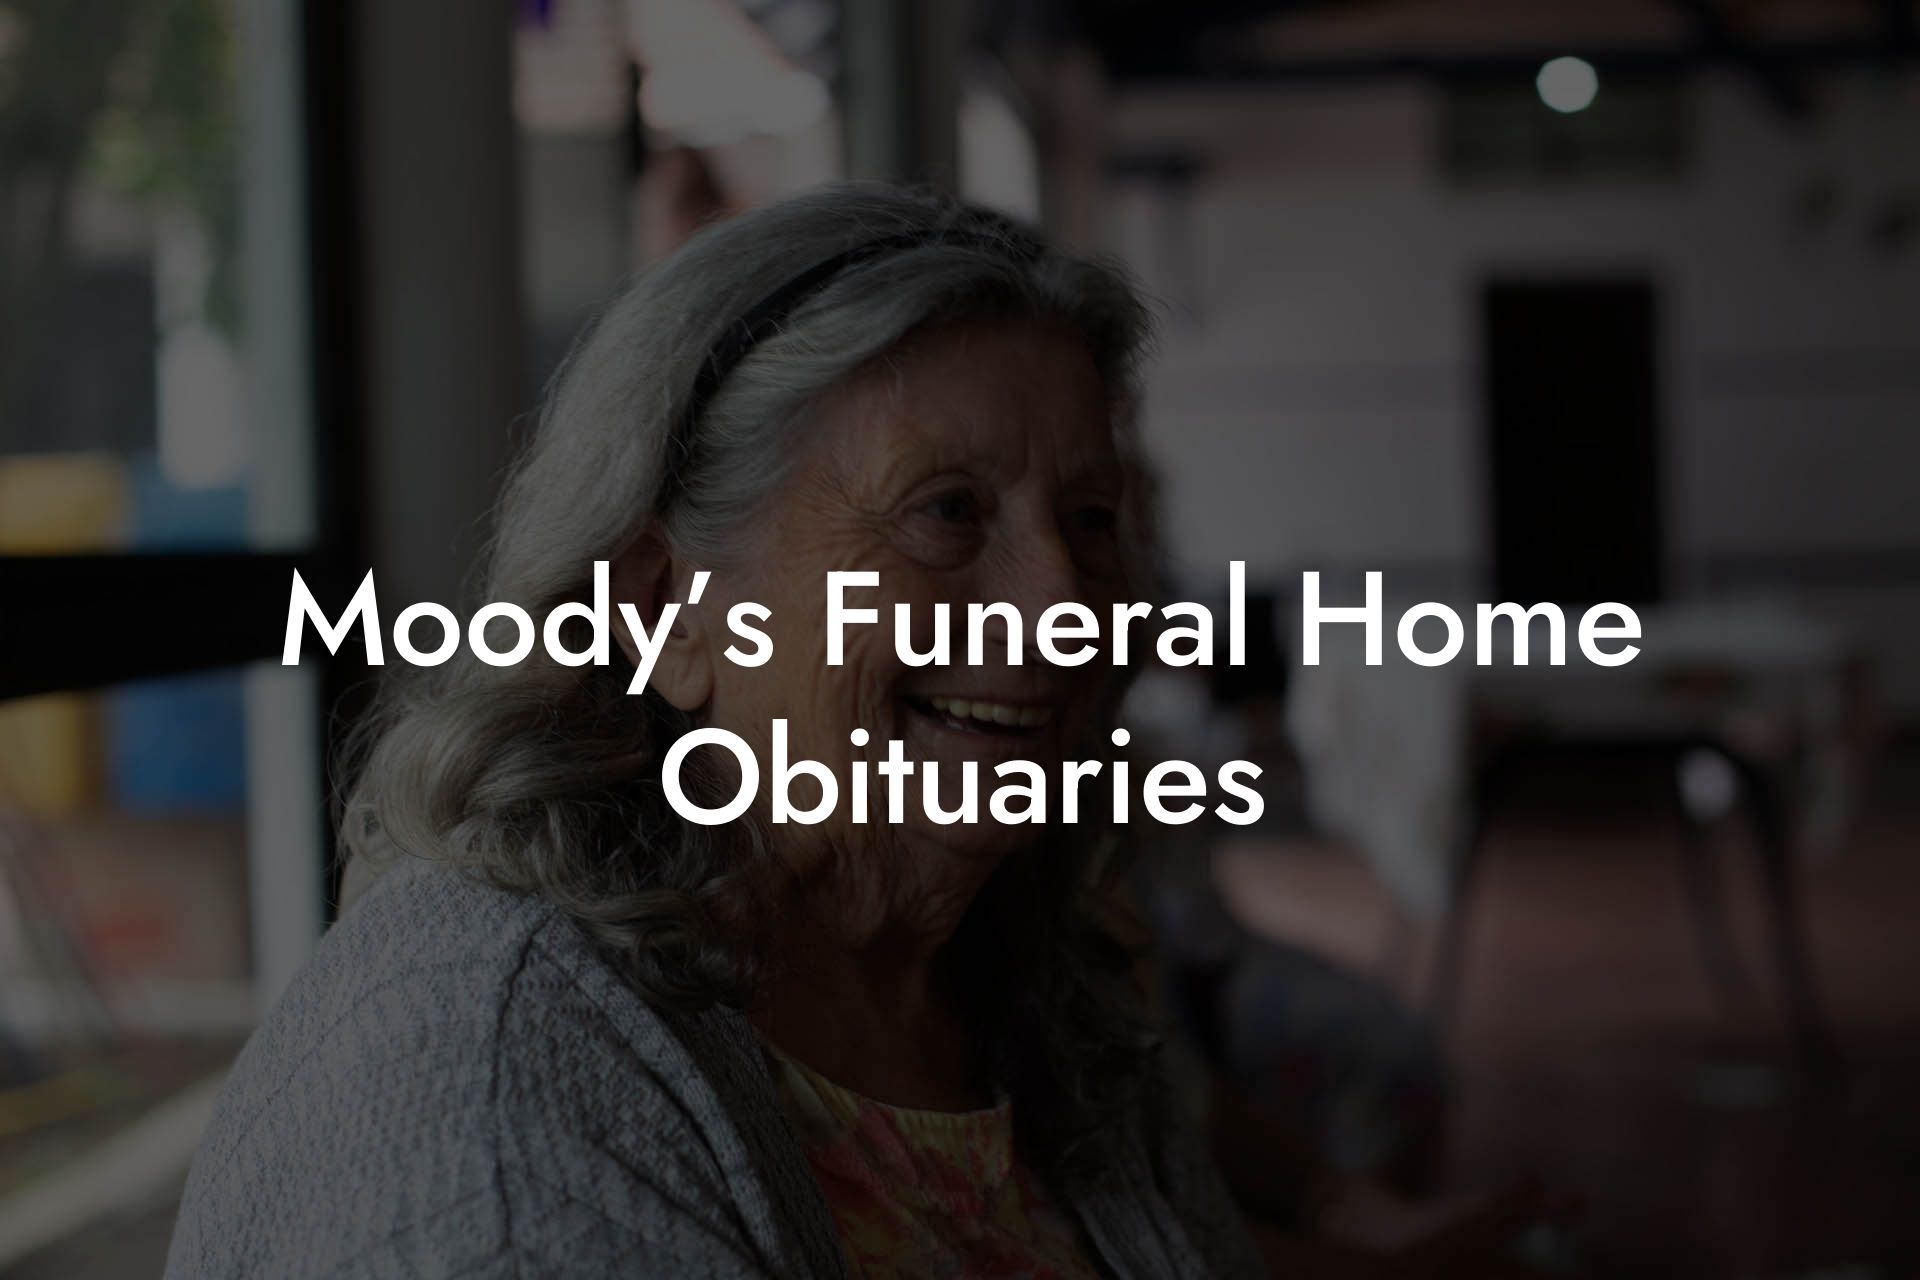 Moody’s Funeral Home Obituaries